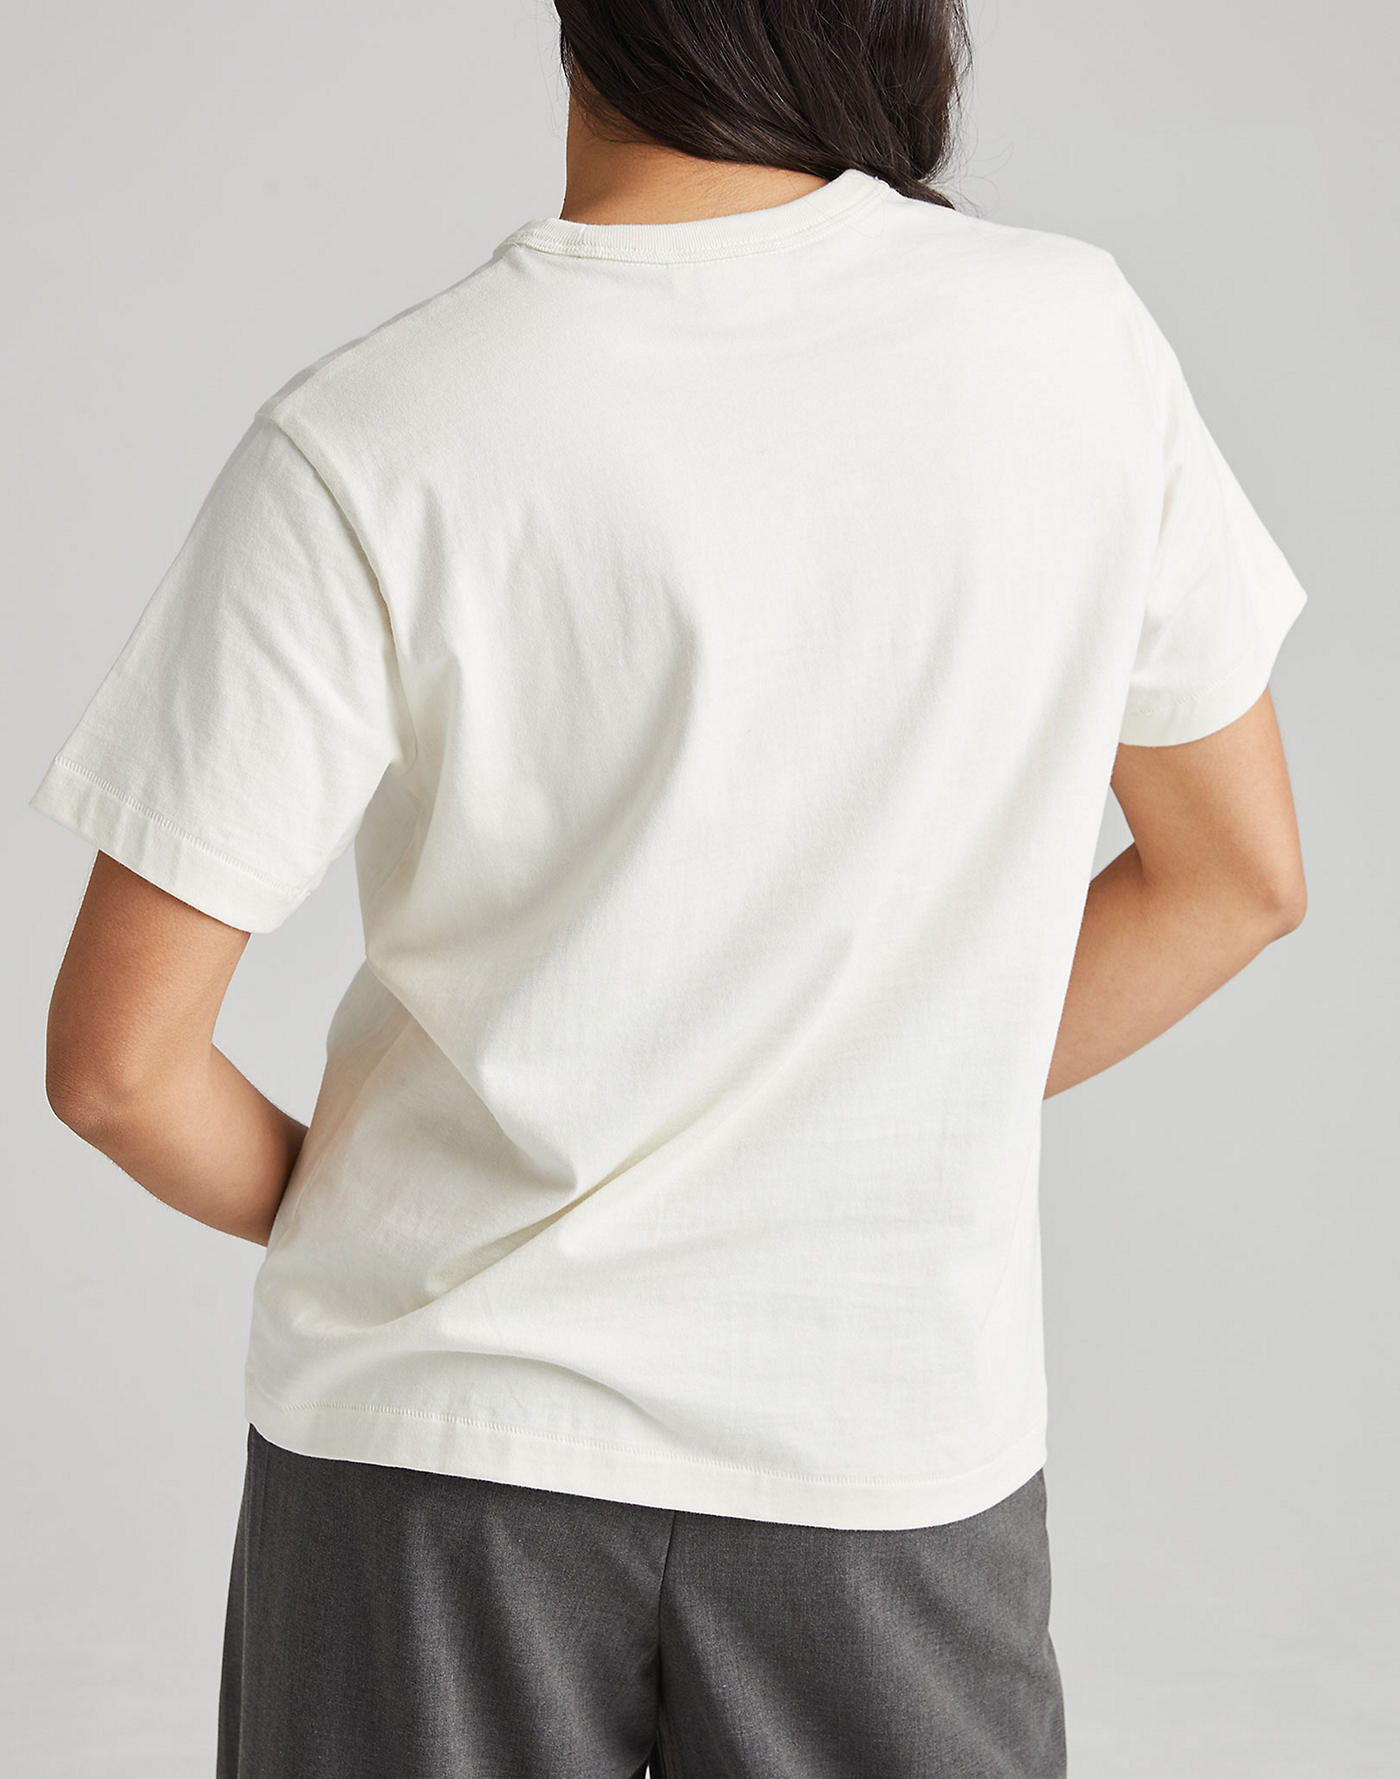 Madewell Richer Poorer Weighted Tee